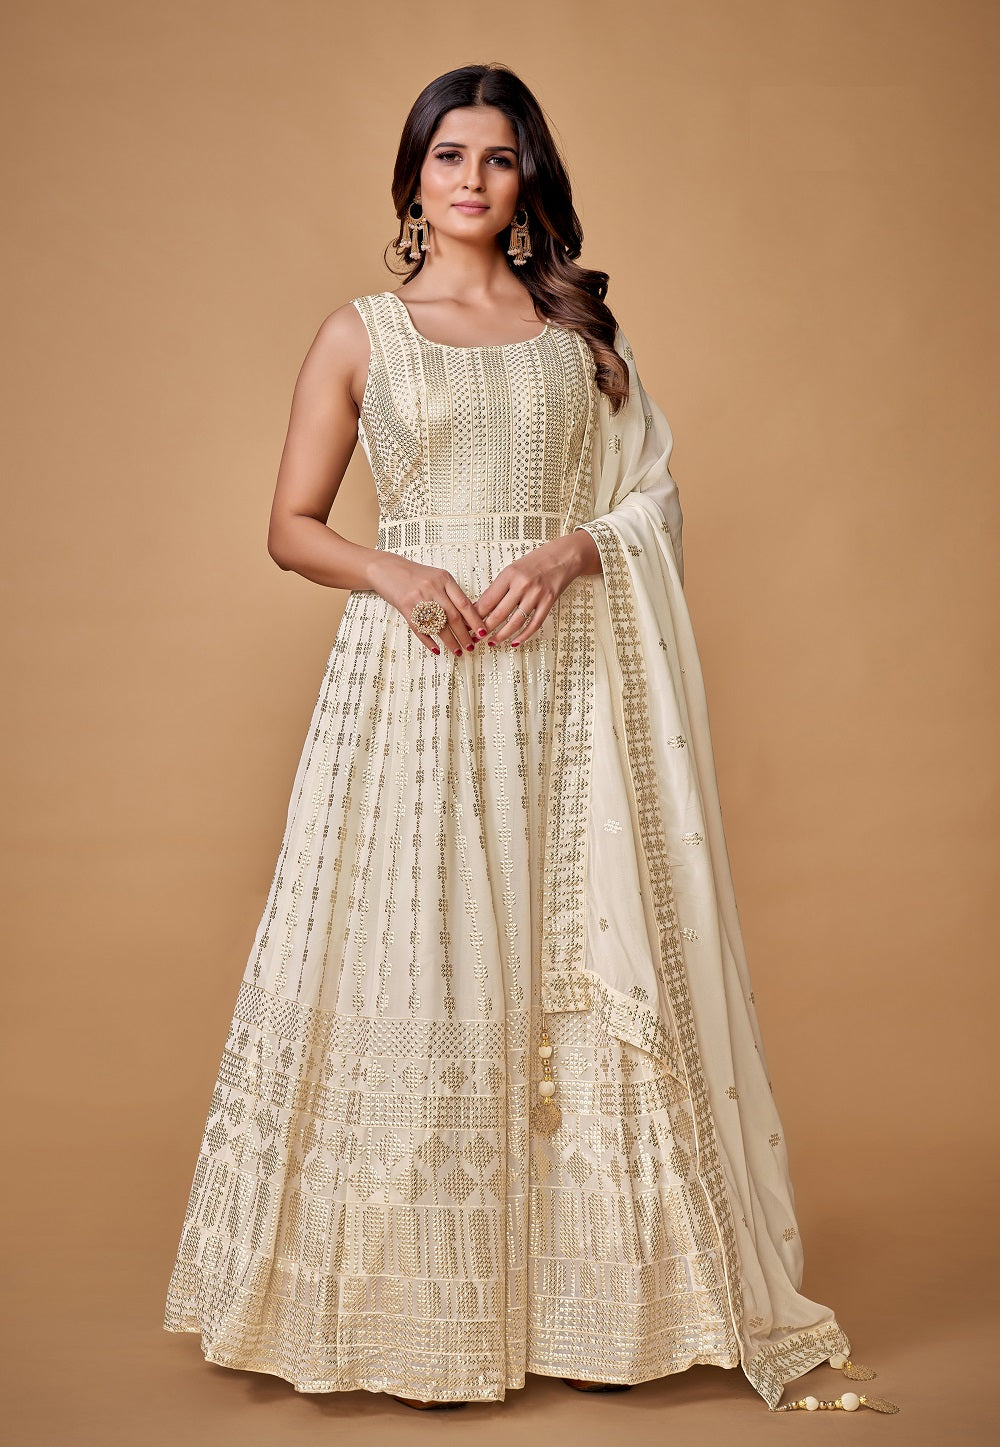 Georgette Embroidered Abaya Style Suit in Off White